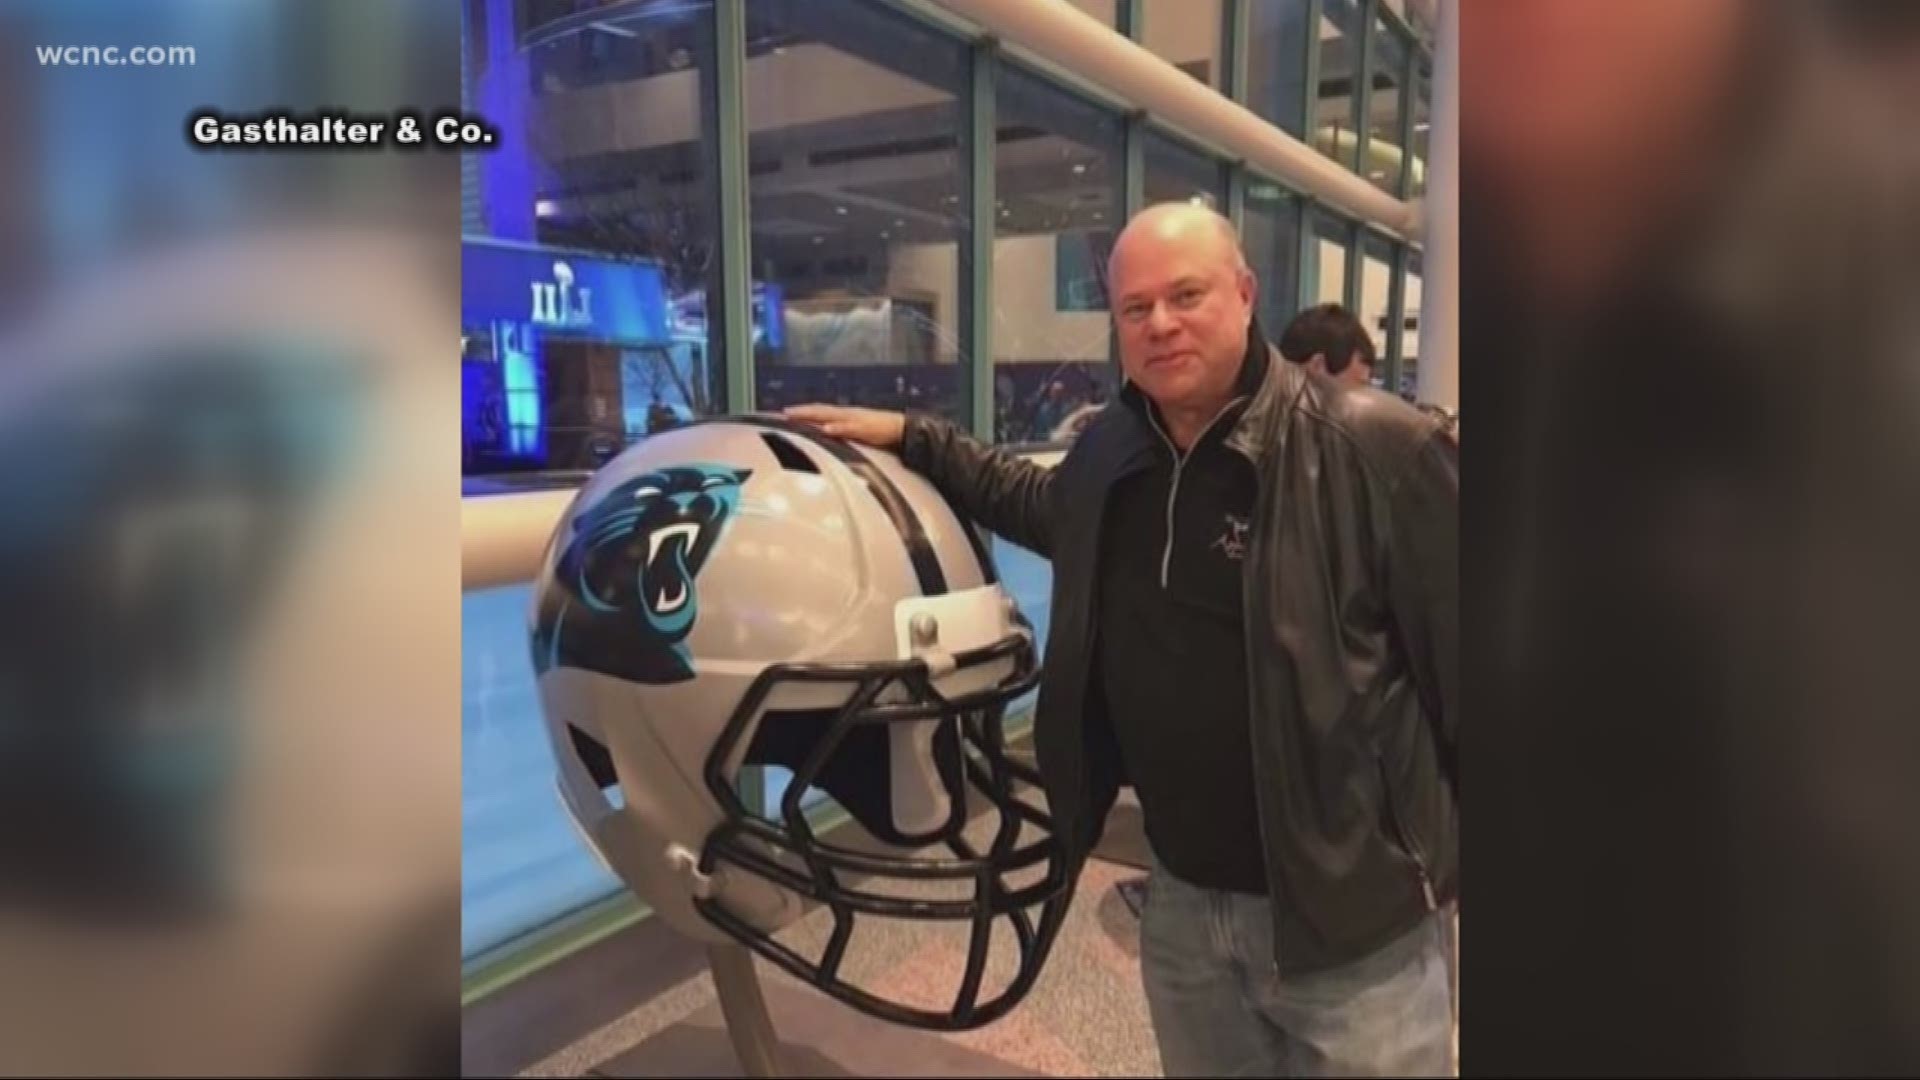 The Carolina Panthers are inching closer to officially having a new owner.